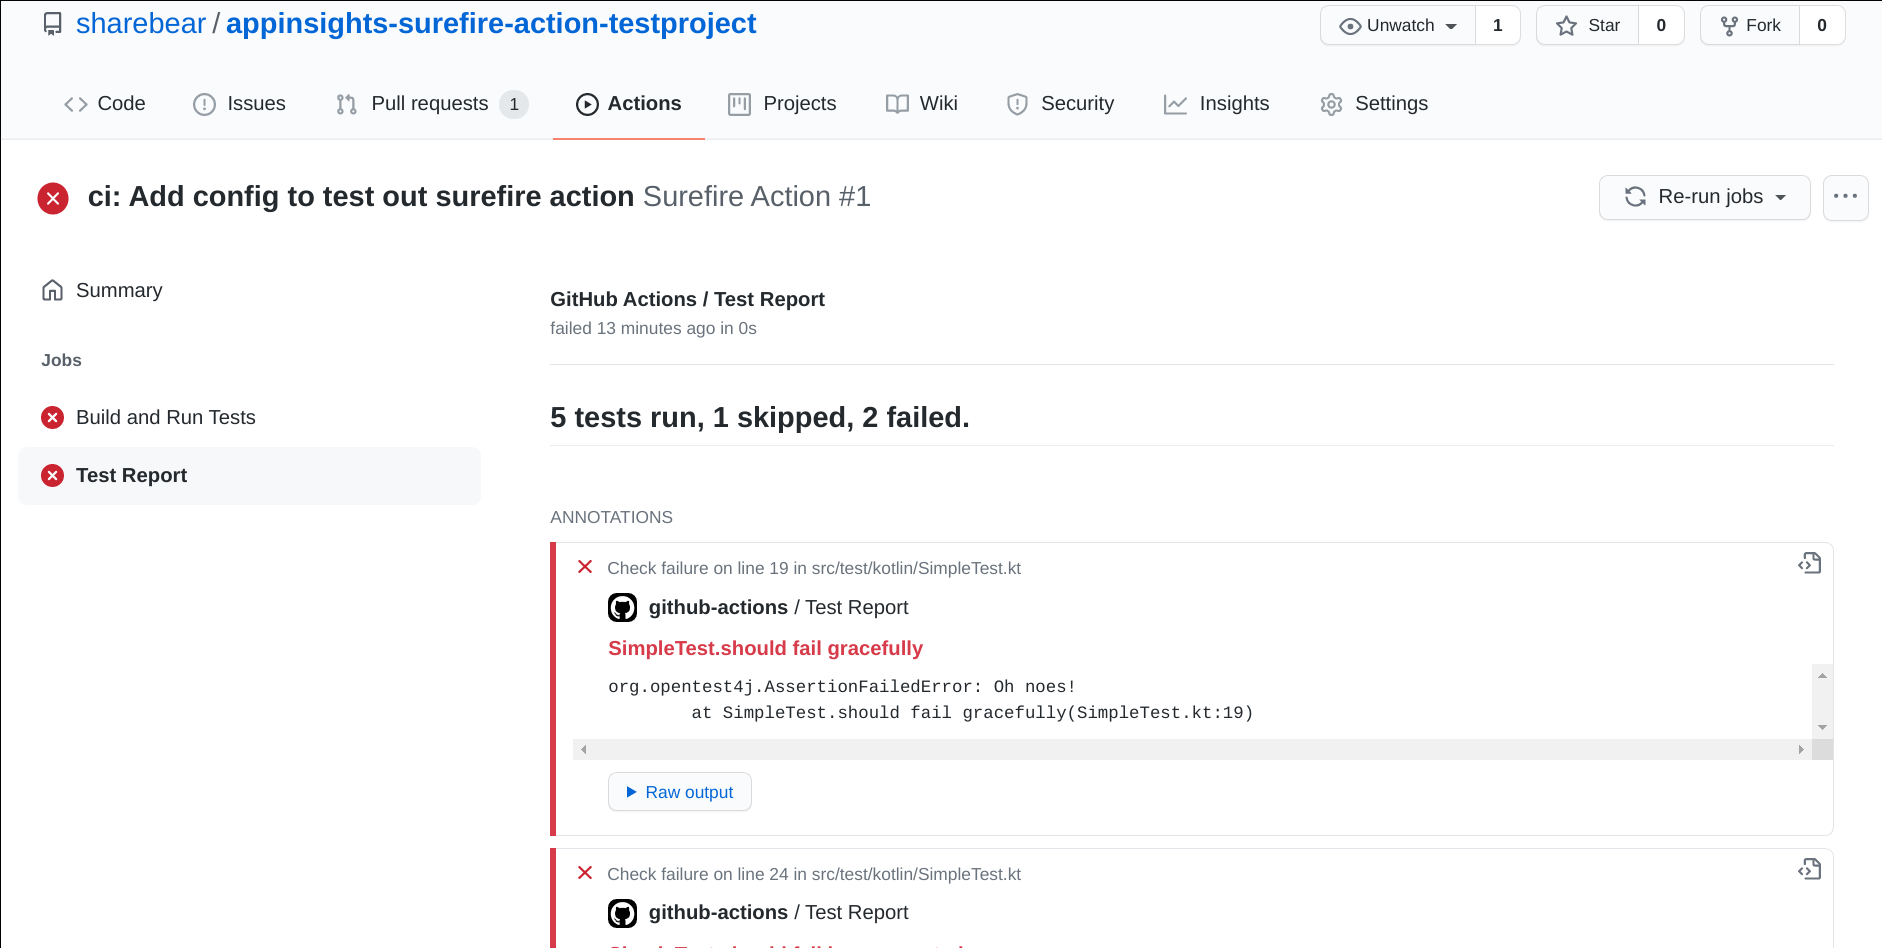 Screenshot of Surefire Report Action summary and annotations